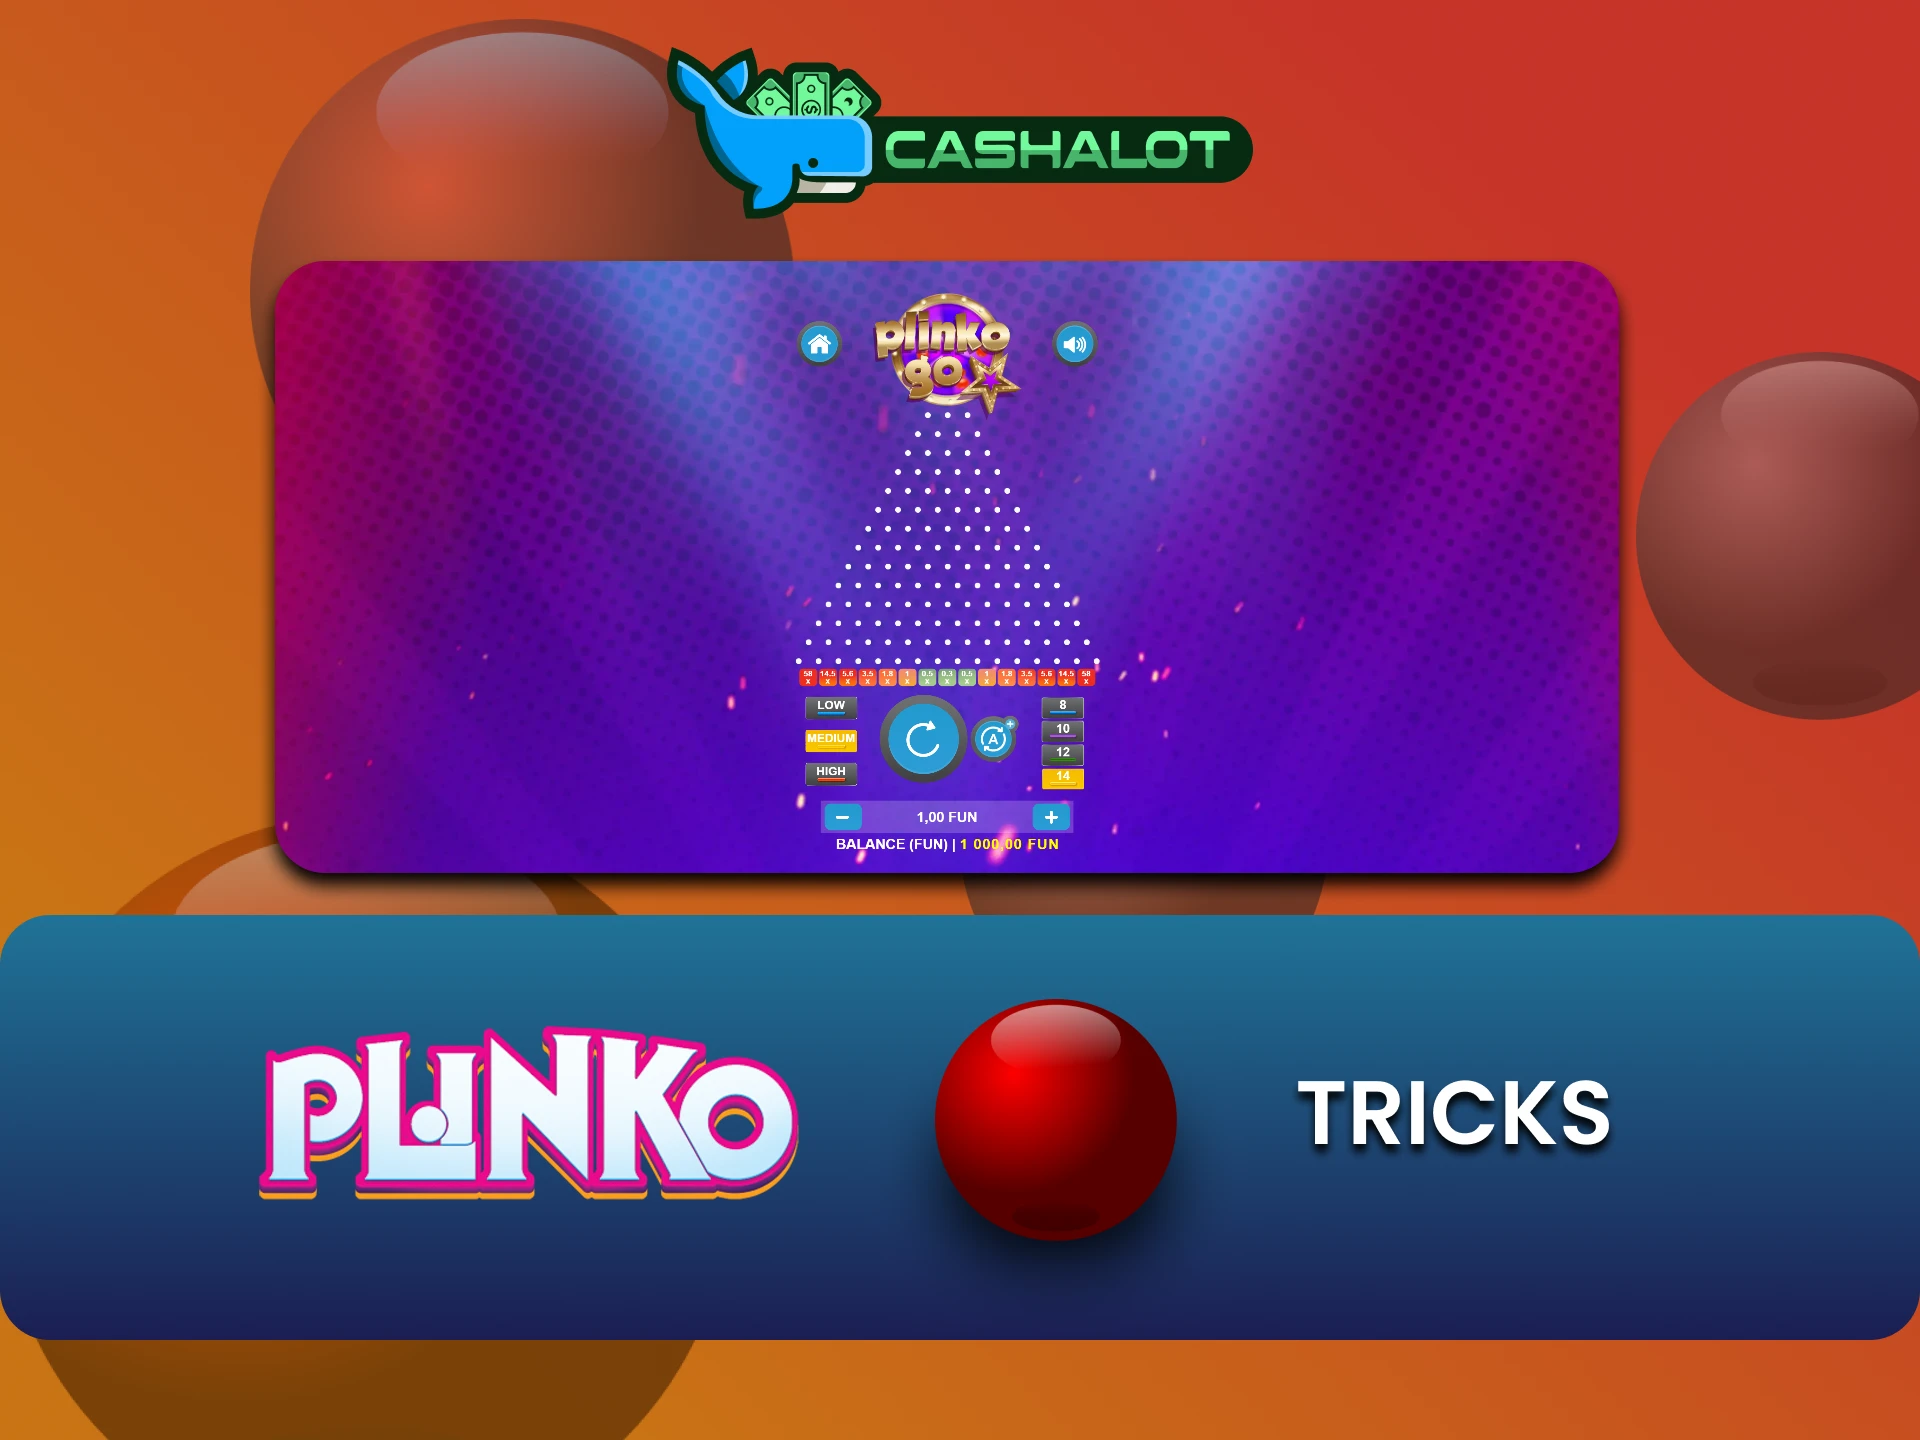 We will tell you about tricks for winning Plinko on Cashalot.